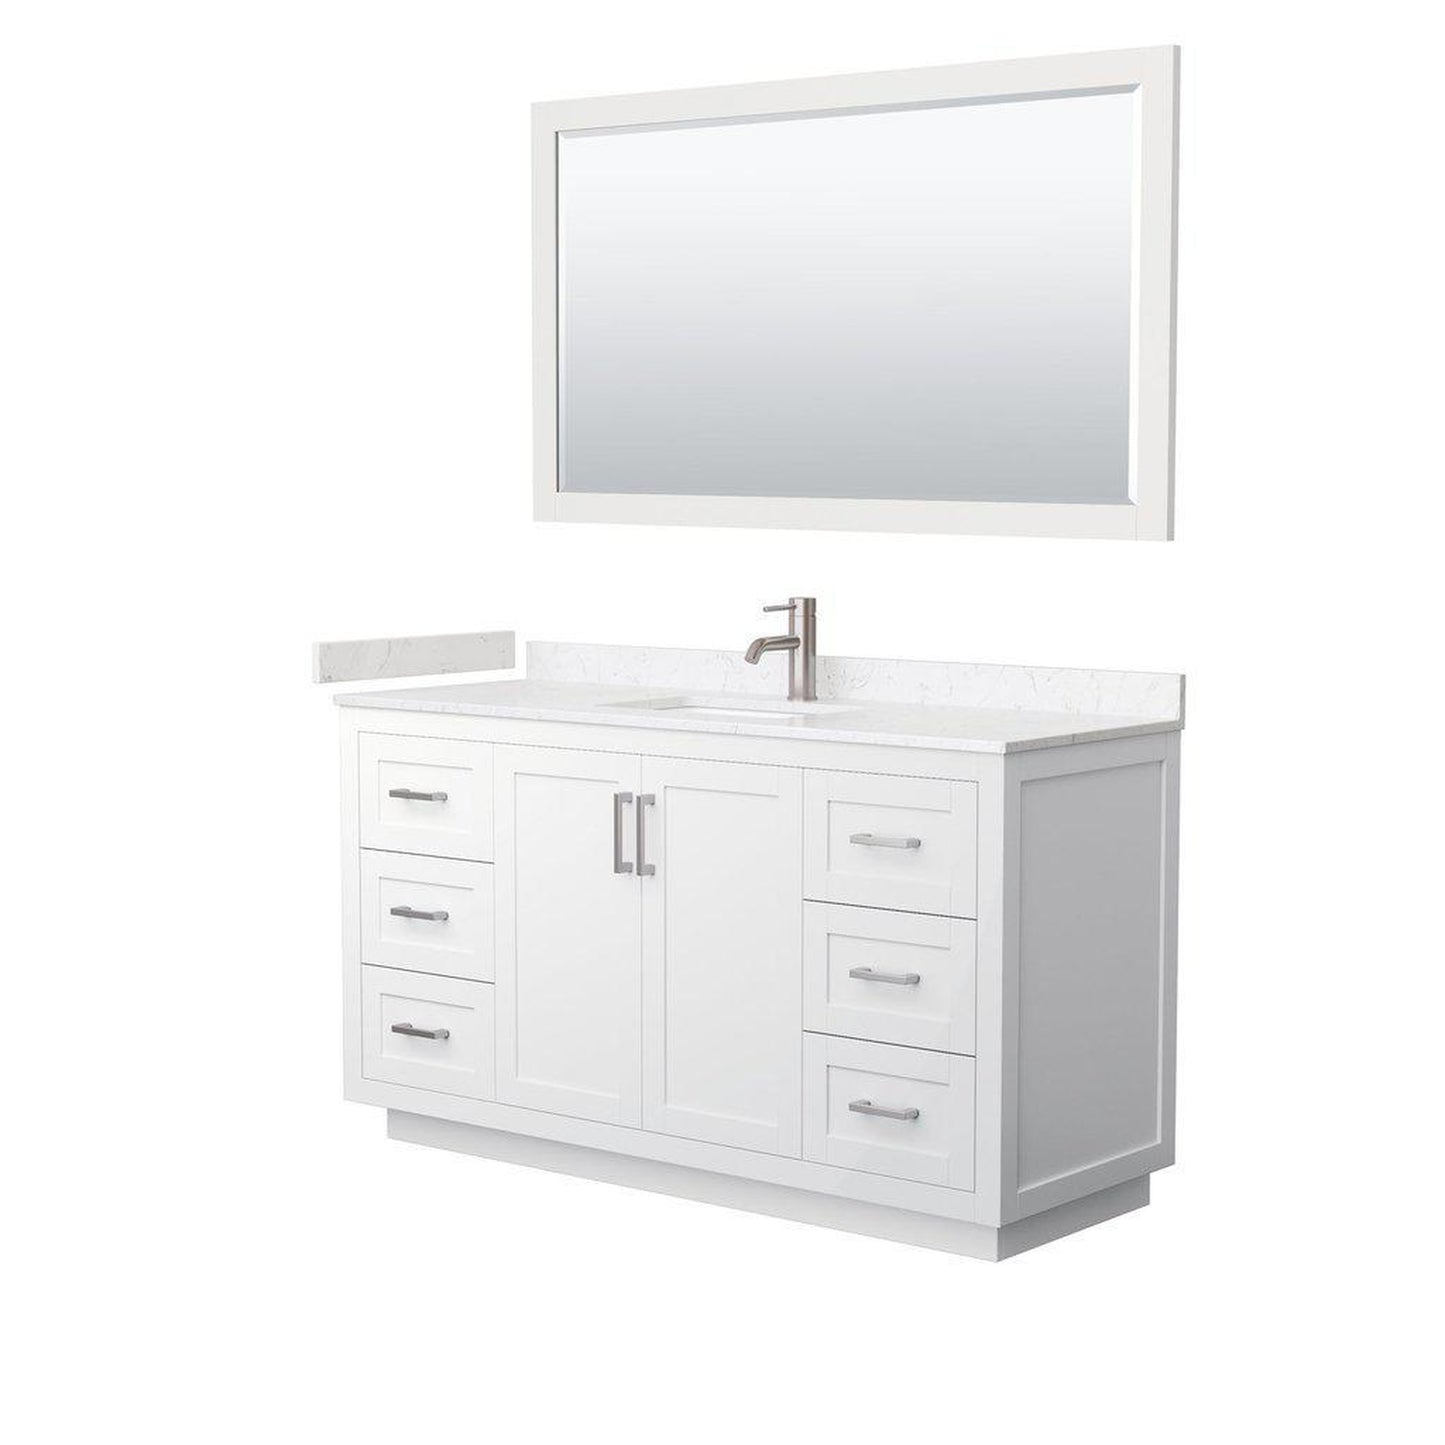 Wyndham Collection Miranda 60" Single Bathroom White Vanity Set With Light-Vein Carrara Cultured Marble Countertop, Undermount Square Sink, 58" Mirror And Brushed Nickel Trim